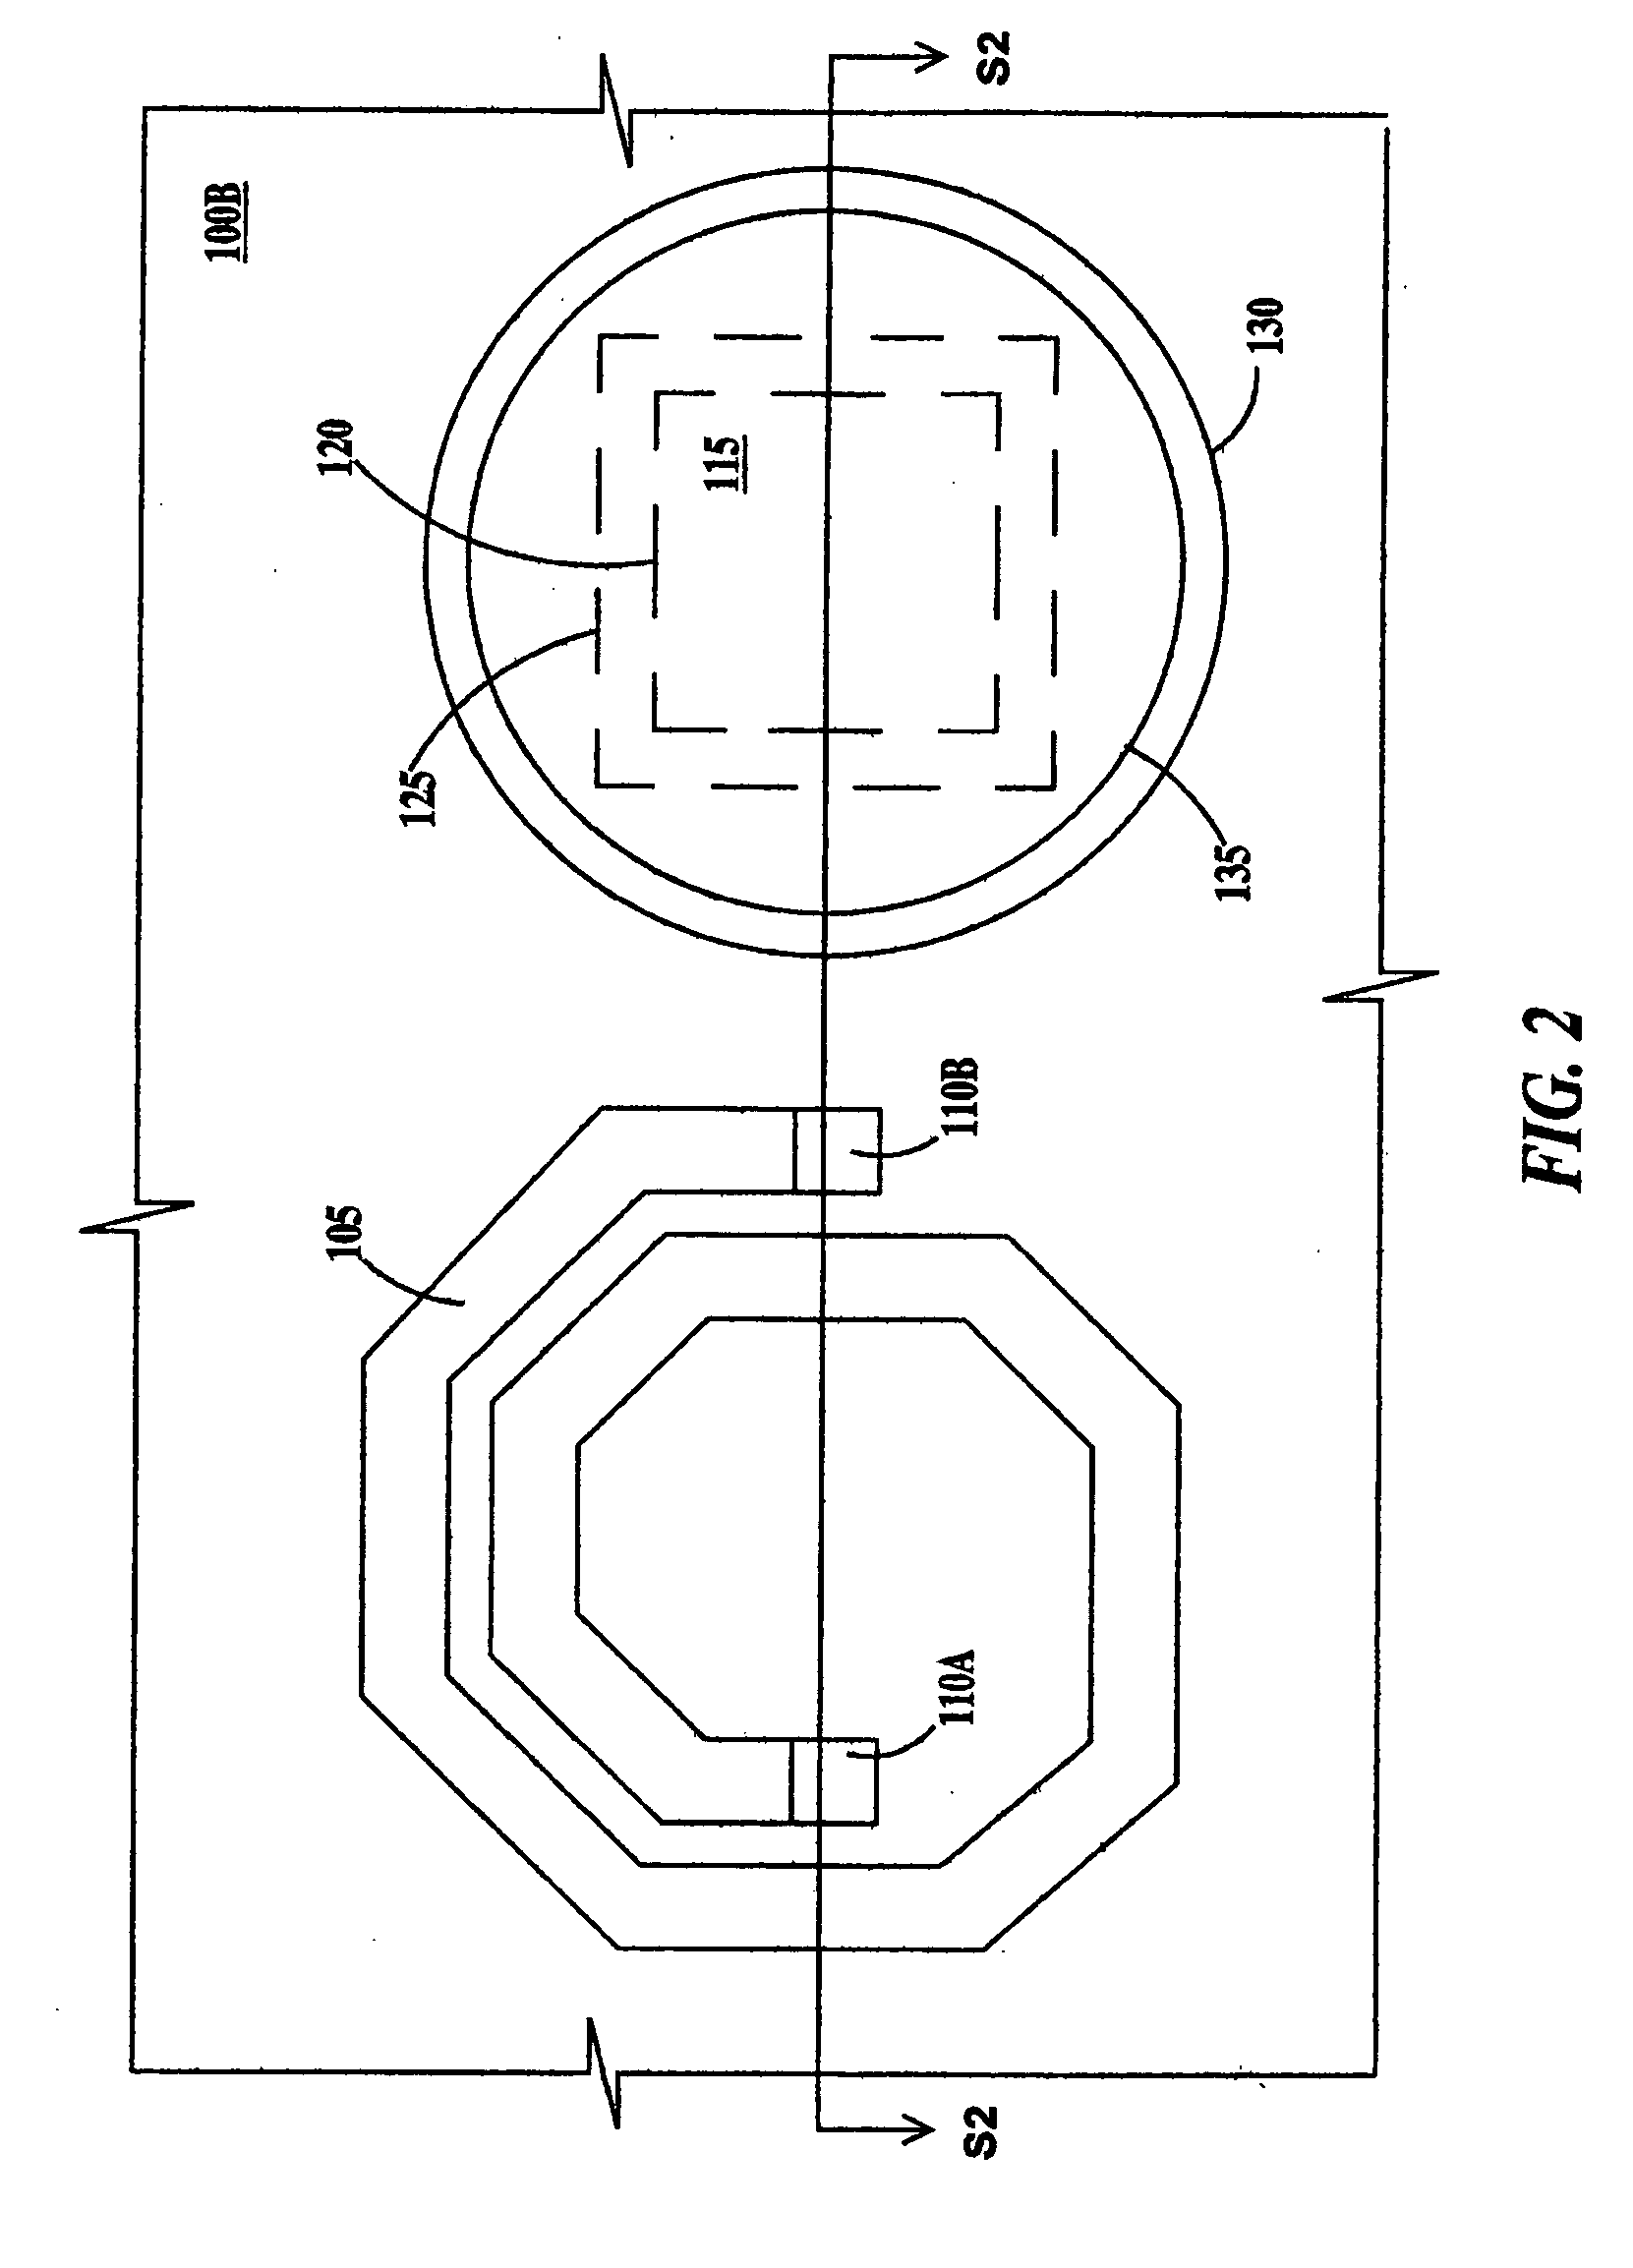 High Q factor integrated circuit inductor